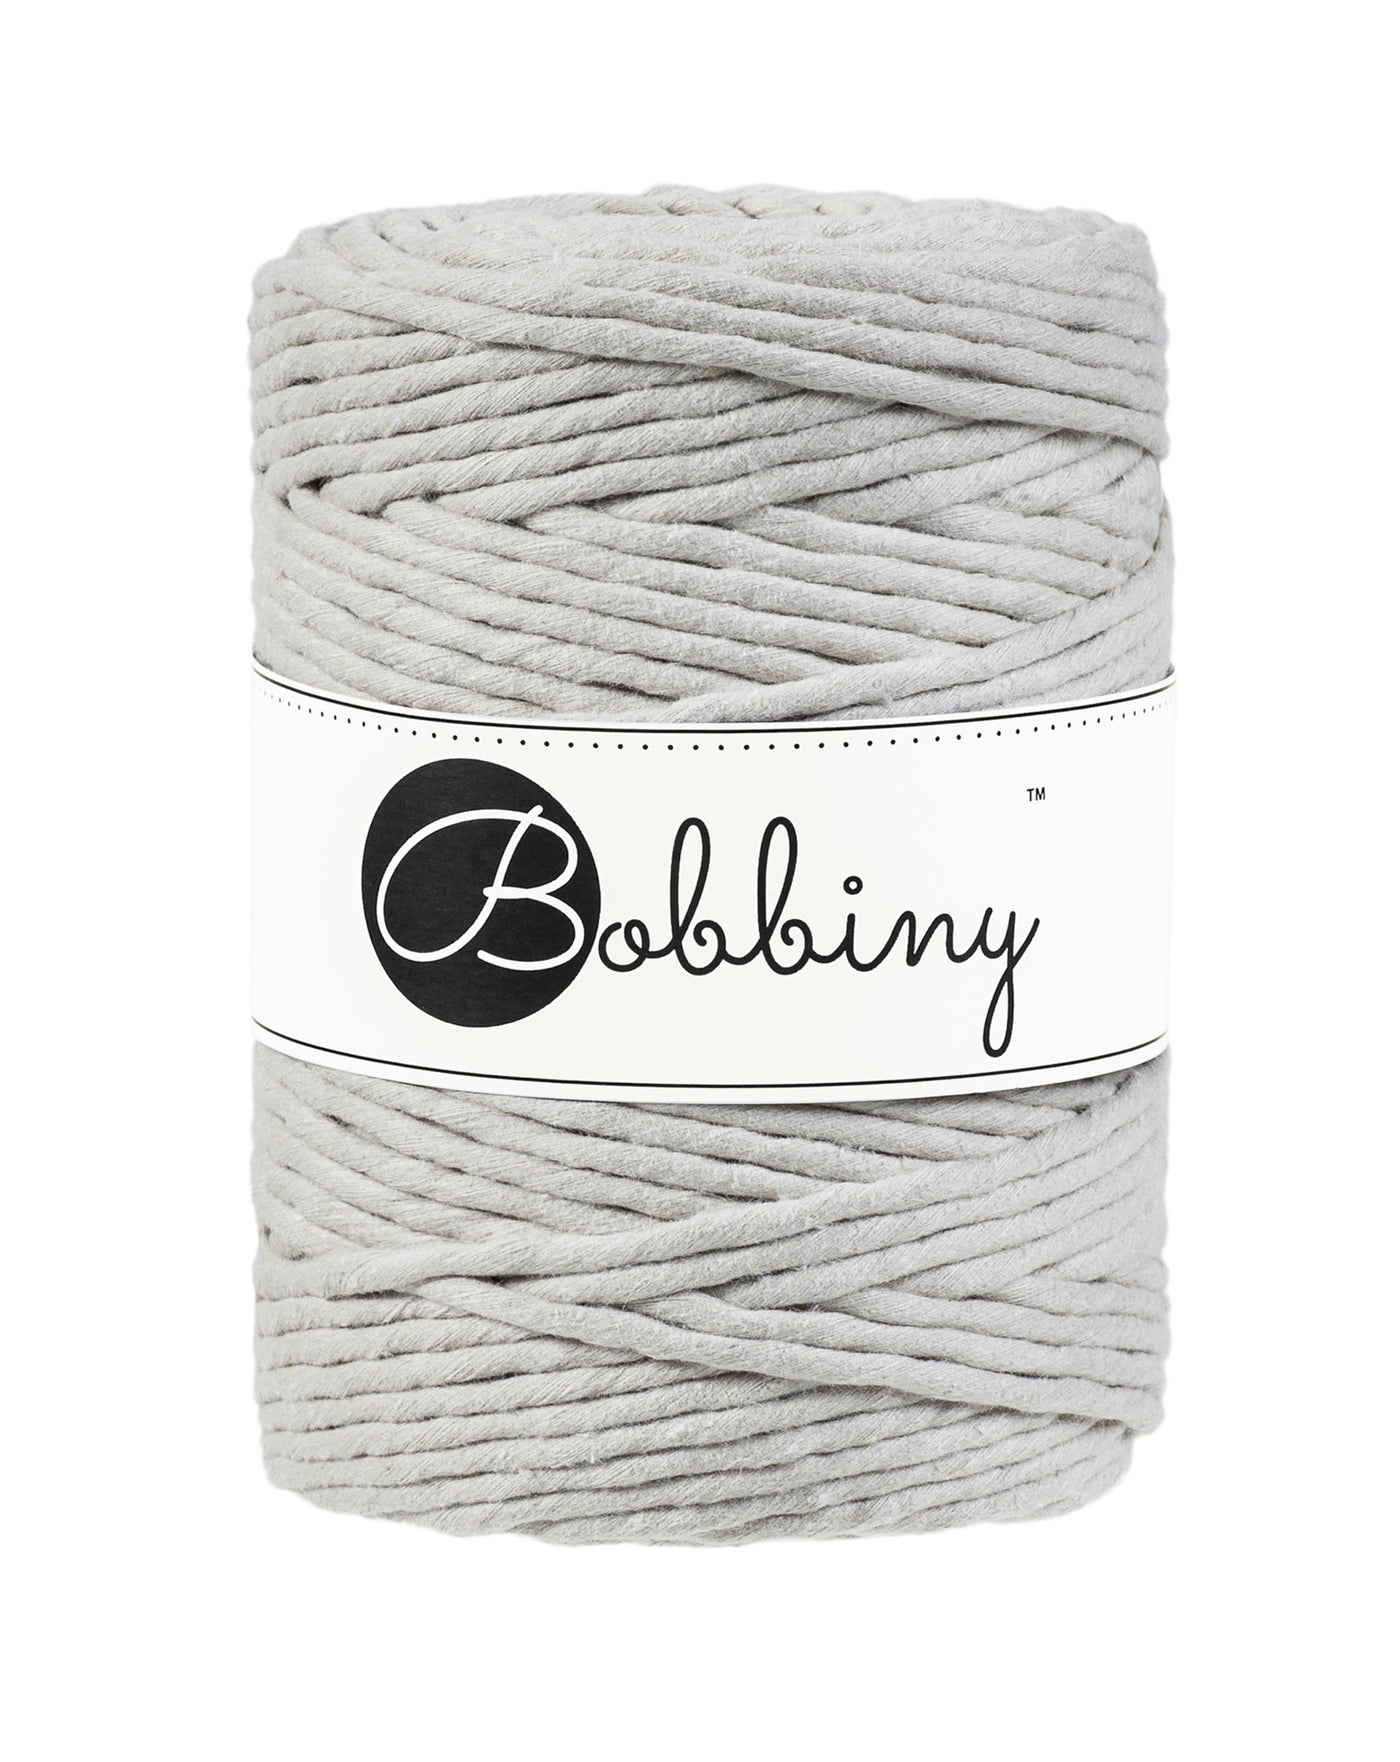 This super soft cord is perfect for Macrame or any other fibre art, and makes the most spectacular fringes and tassels.  It is made from 100% recycled cotton, is single twist and contains 112 individual fibres.  It contains no harmful substances and is approved to Oeko-Tex standards.  The inner spool is made from recycled paper and is biodegradable.  Length 100m (108 yards)  Weight 660 gms